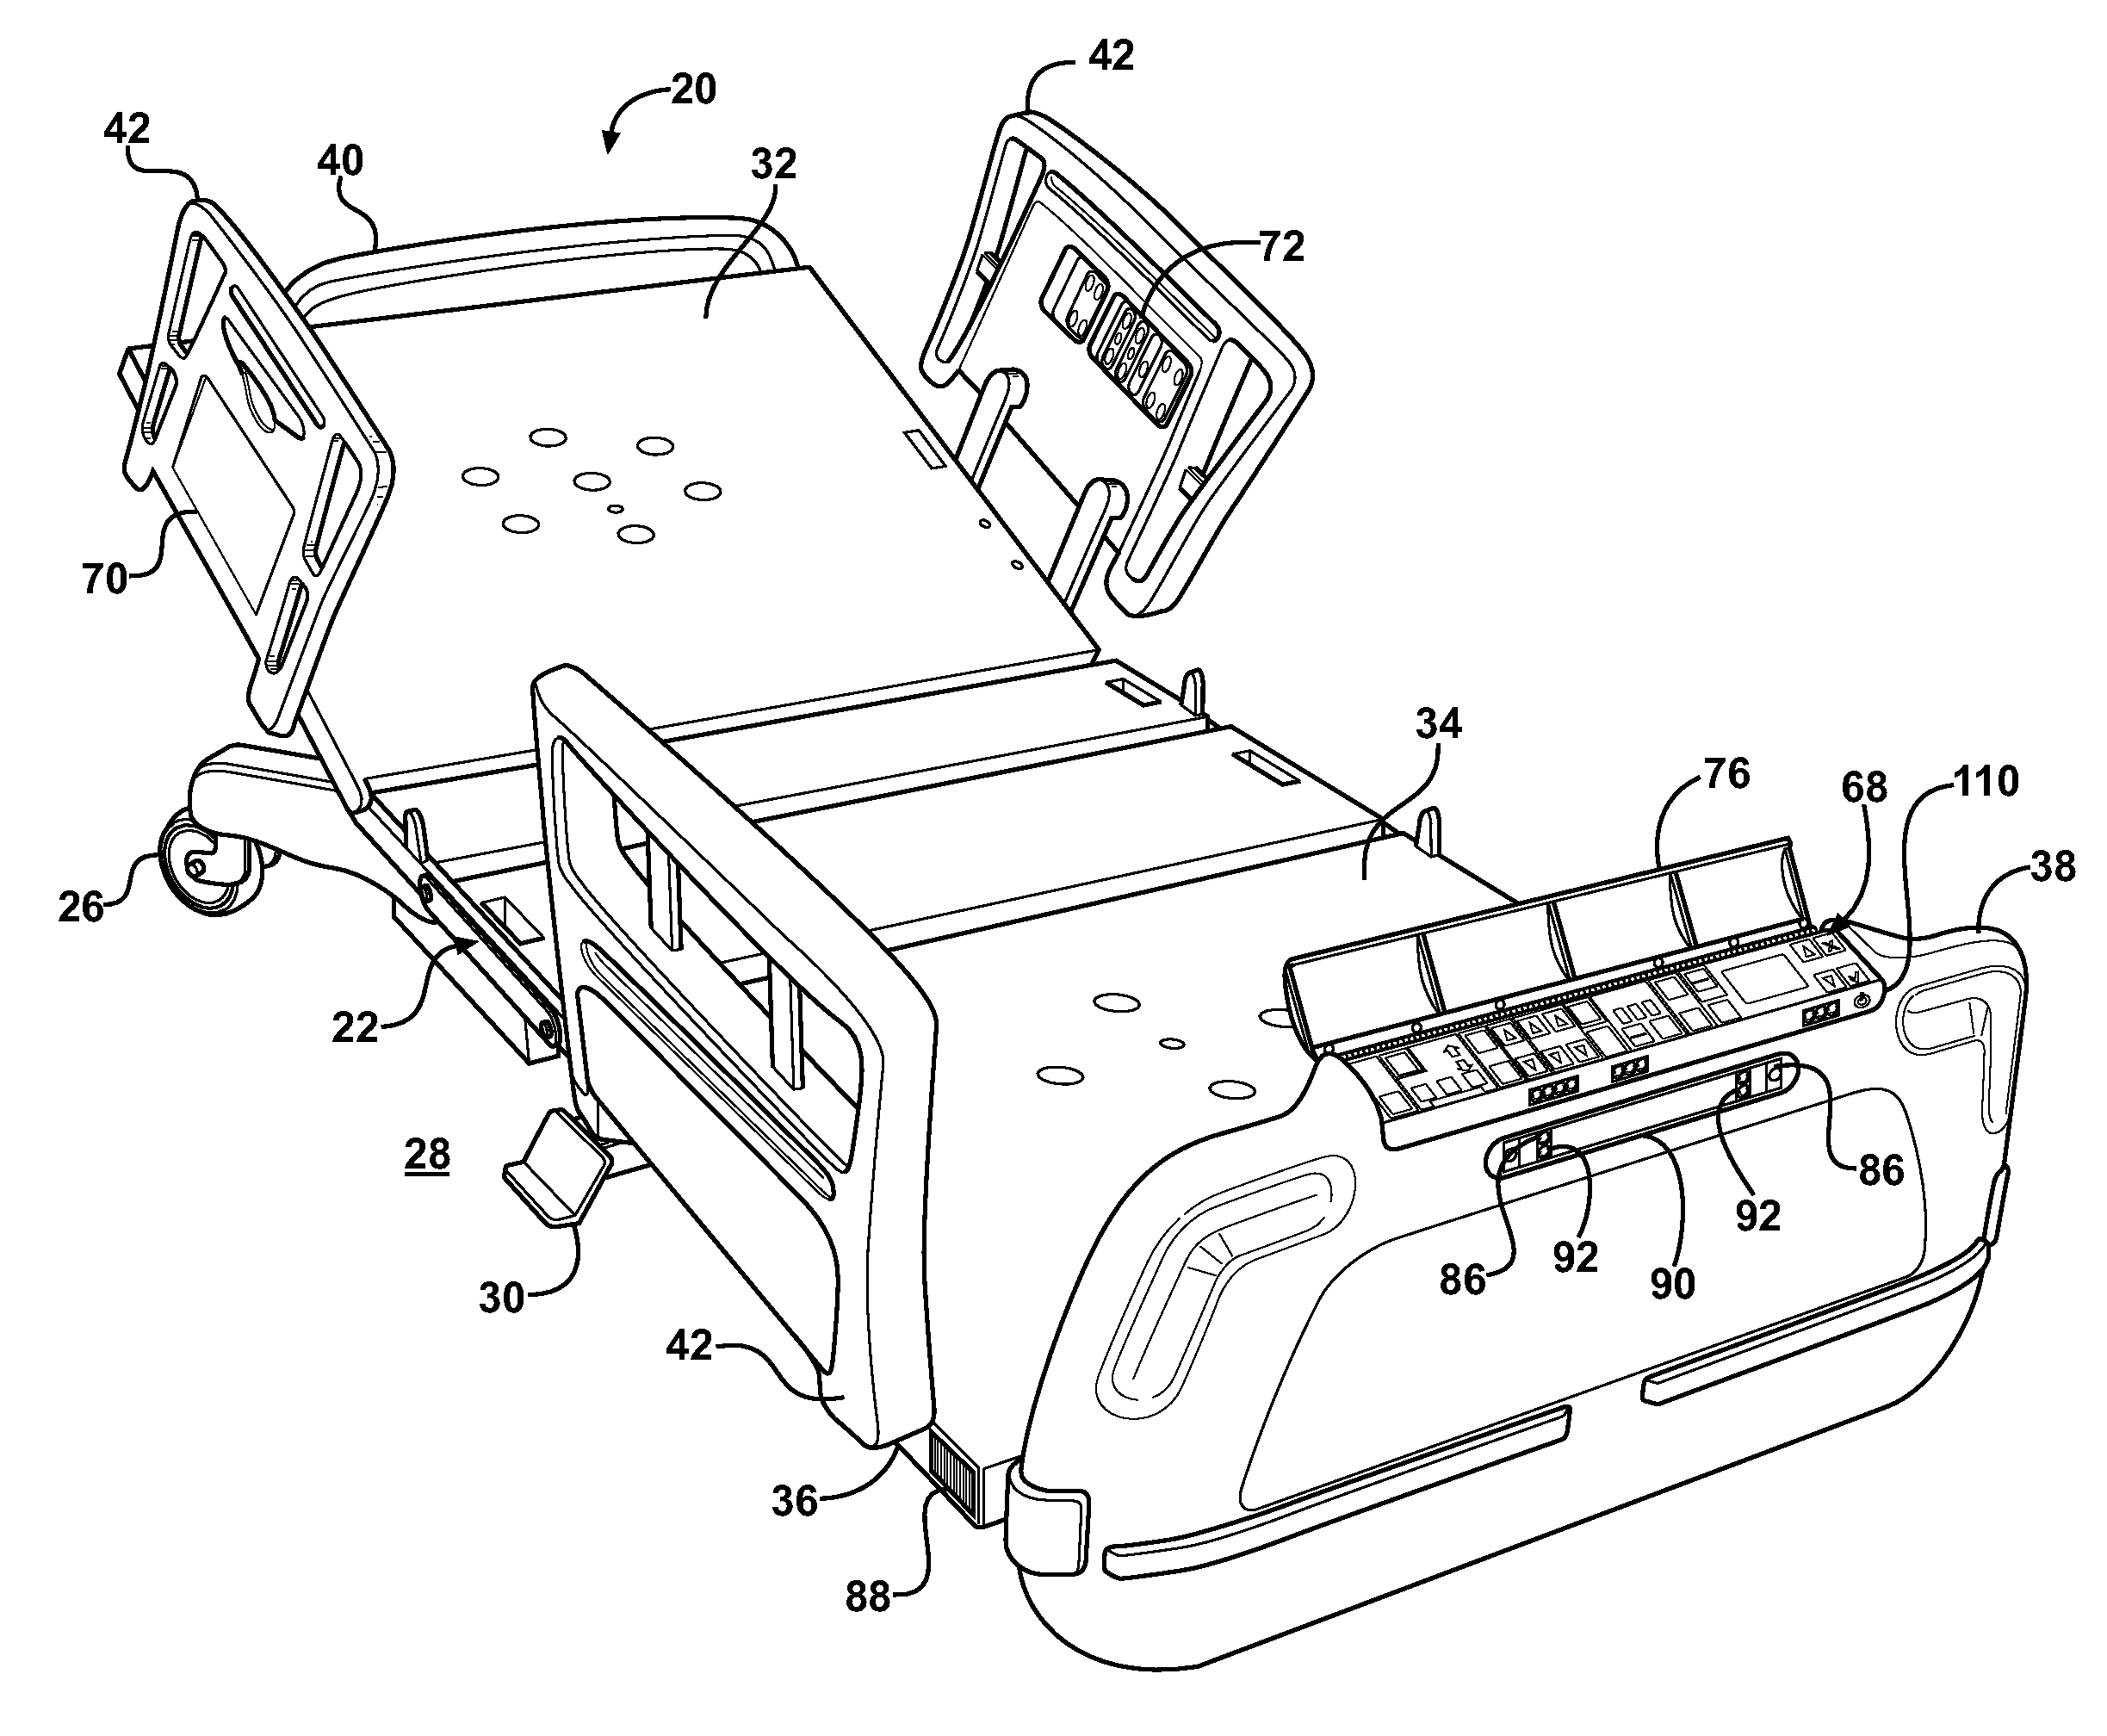 Patient handling device including local status indication, one-touch fowler angle adjustment, and power-on alarm configuration